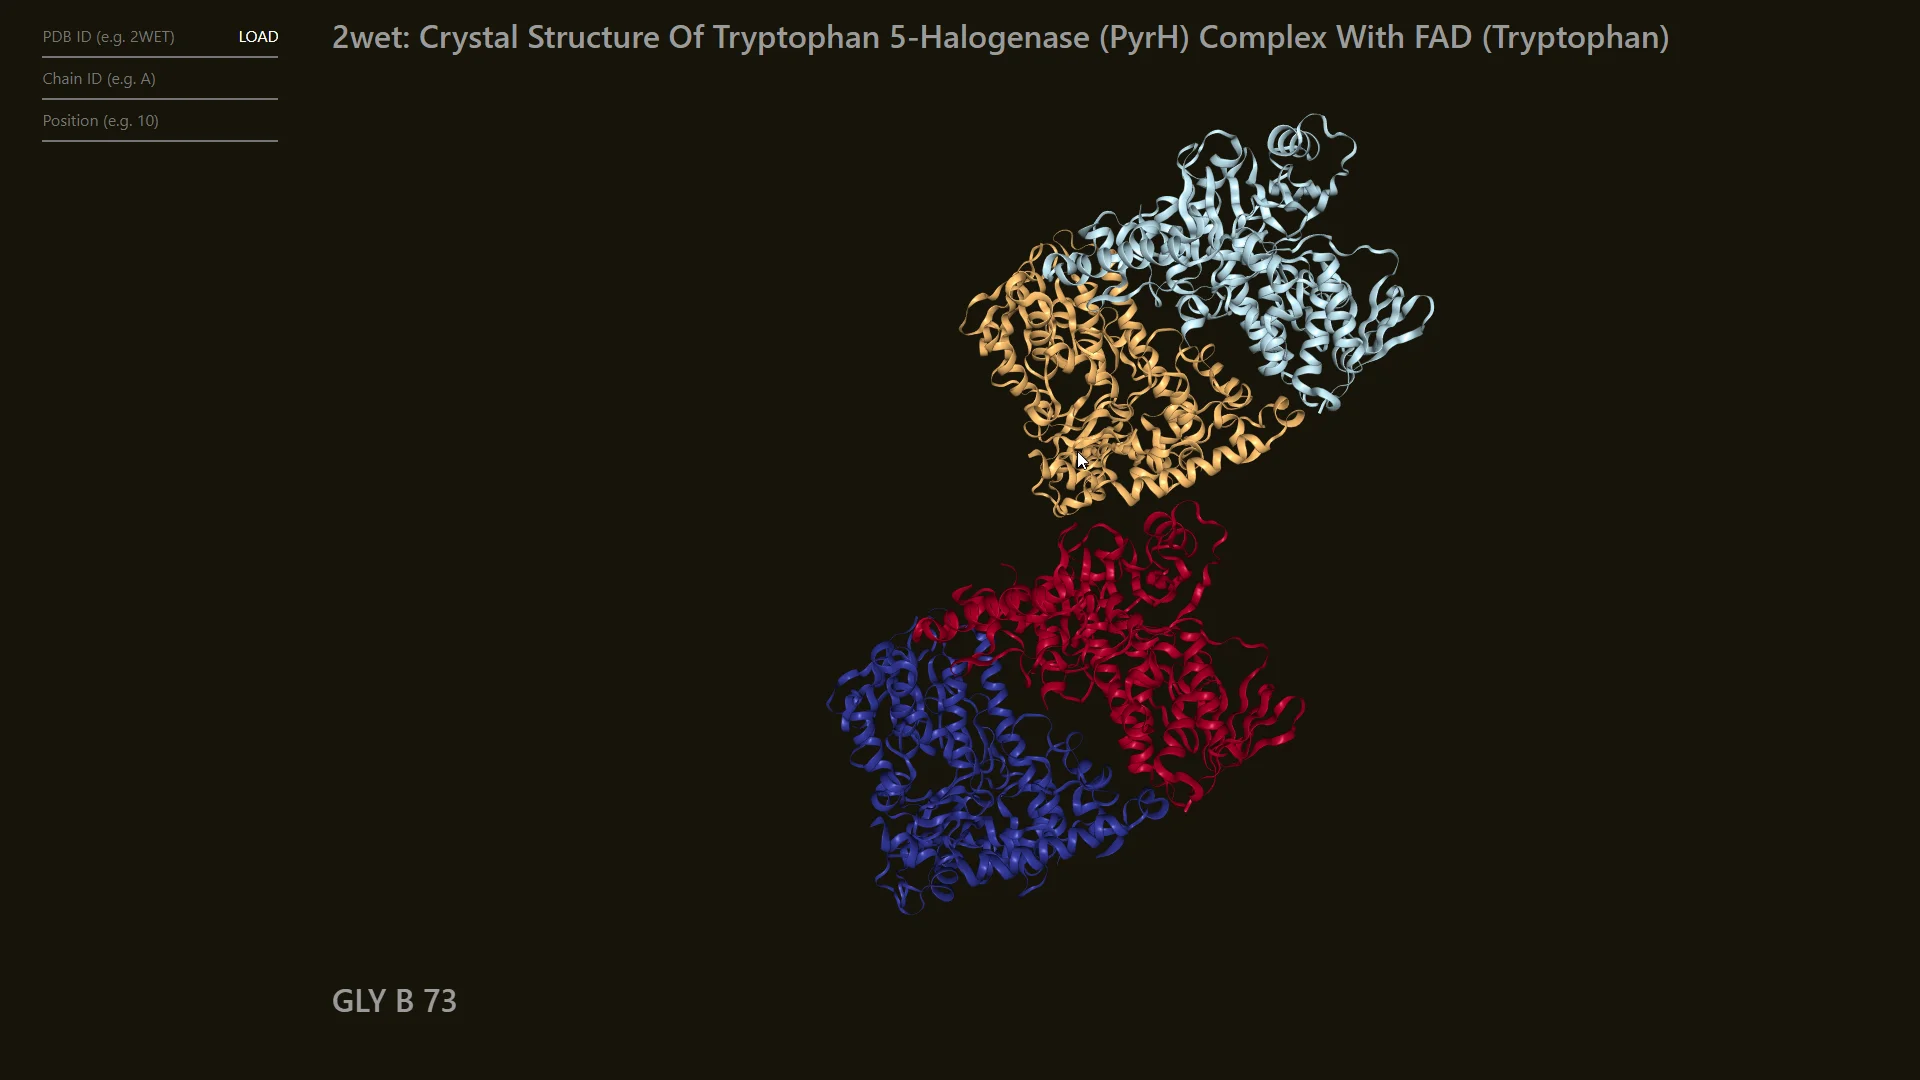 A full view of a protein crystal structure from the RCSB and UI